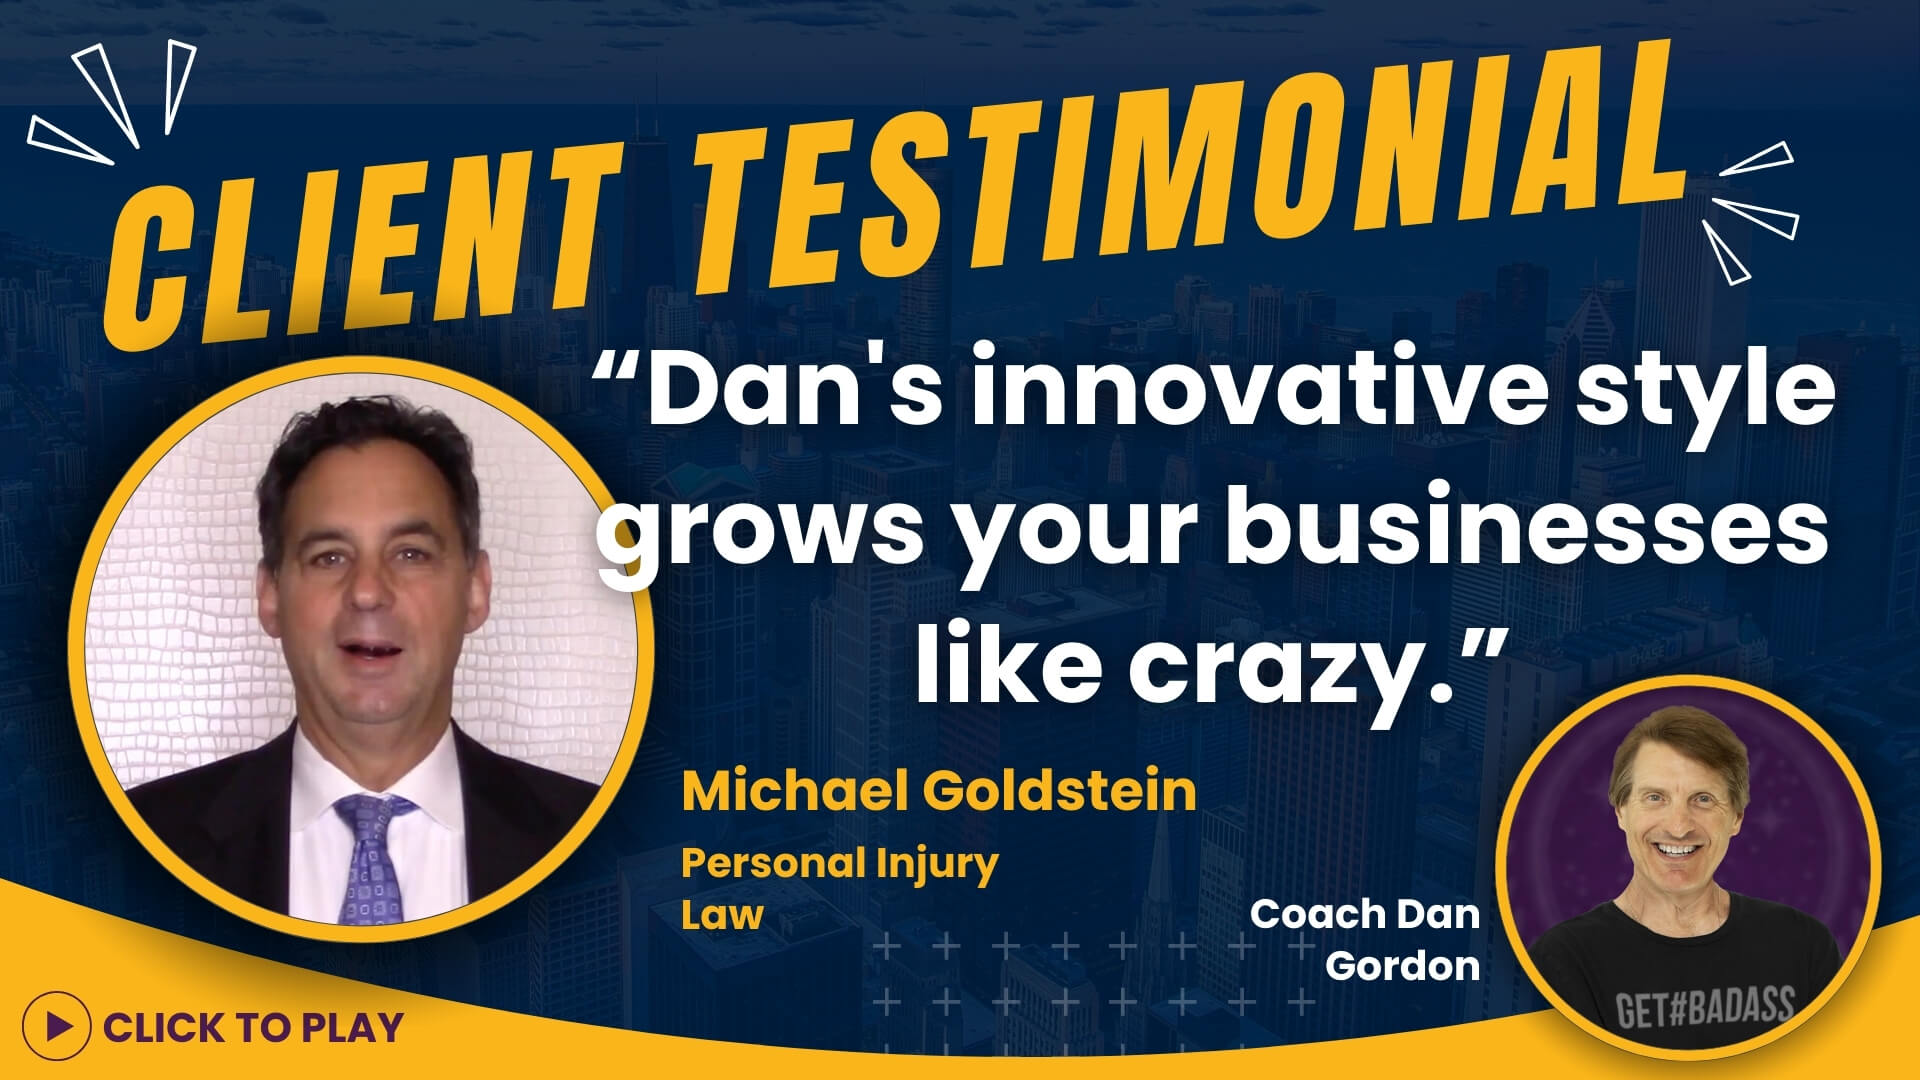 A professional endorsement from Michael Goldstein, a Personal Injury Attorney, featuring his testimonial for Coach Dan Gordon.